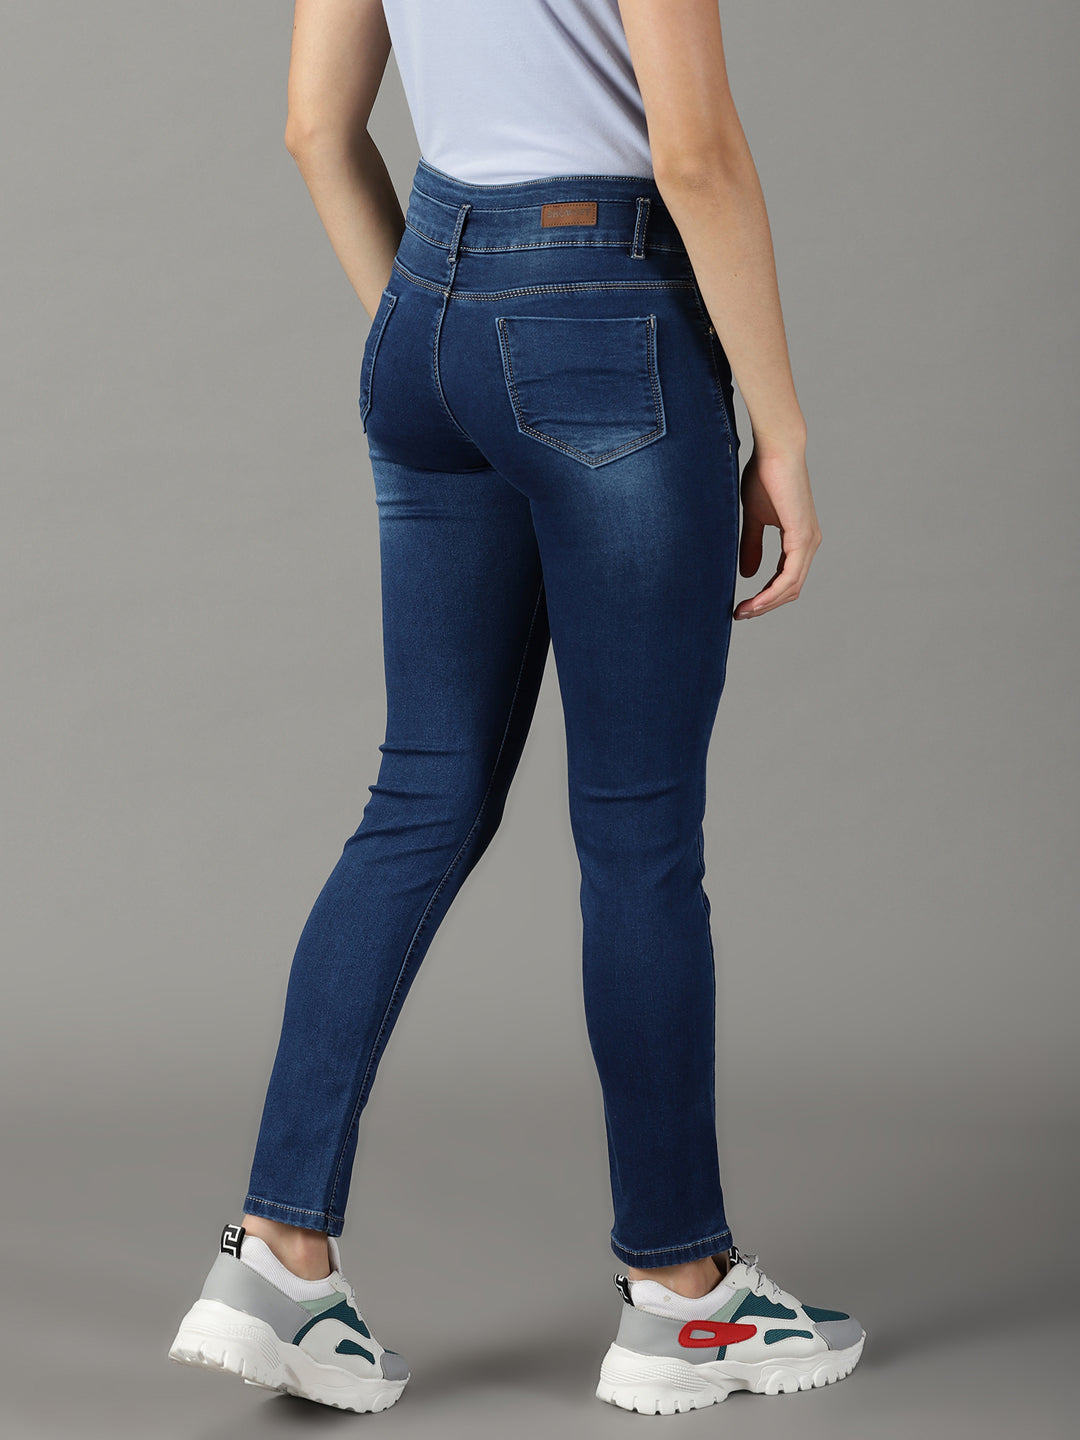 Women Solid Navy Blue Tapered Fit Denim Jeans